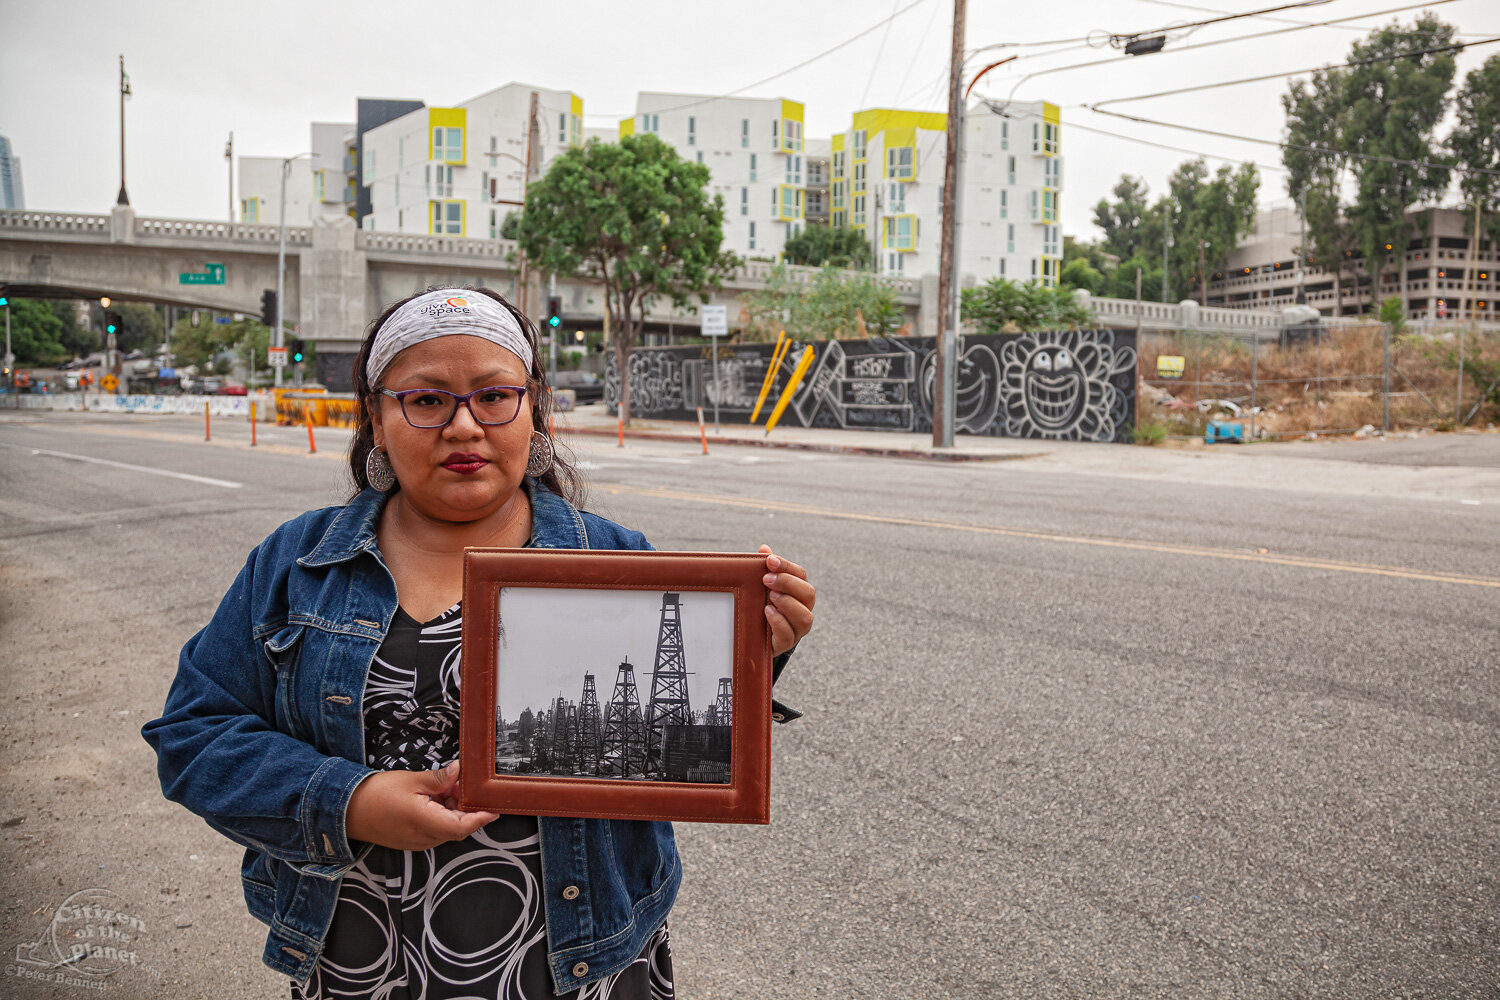  Resident, Esther Salas stands in front of the future site of the Echo Park Hotel, on W. 1st Street and Glendale Boulevard, a 185-room hotel. She holds a 1901 photo of the area, showing oil derricks lining the road.  